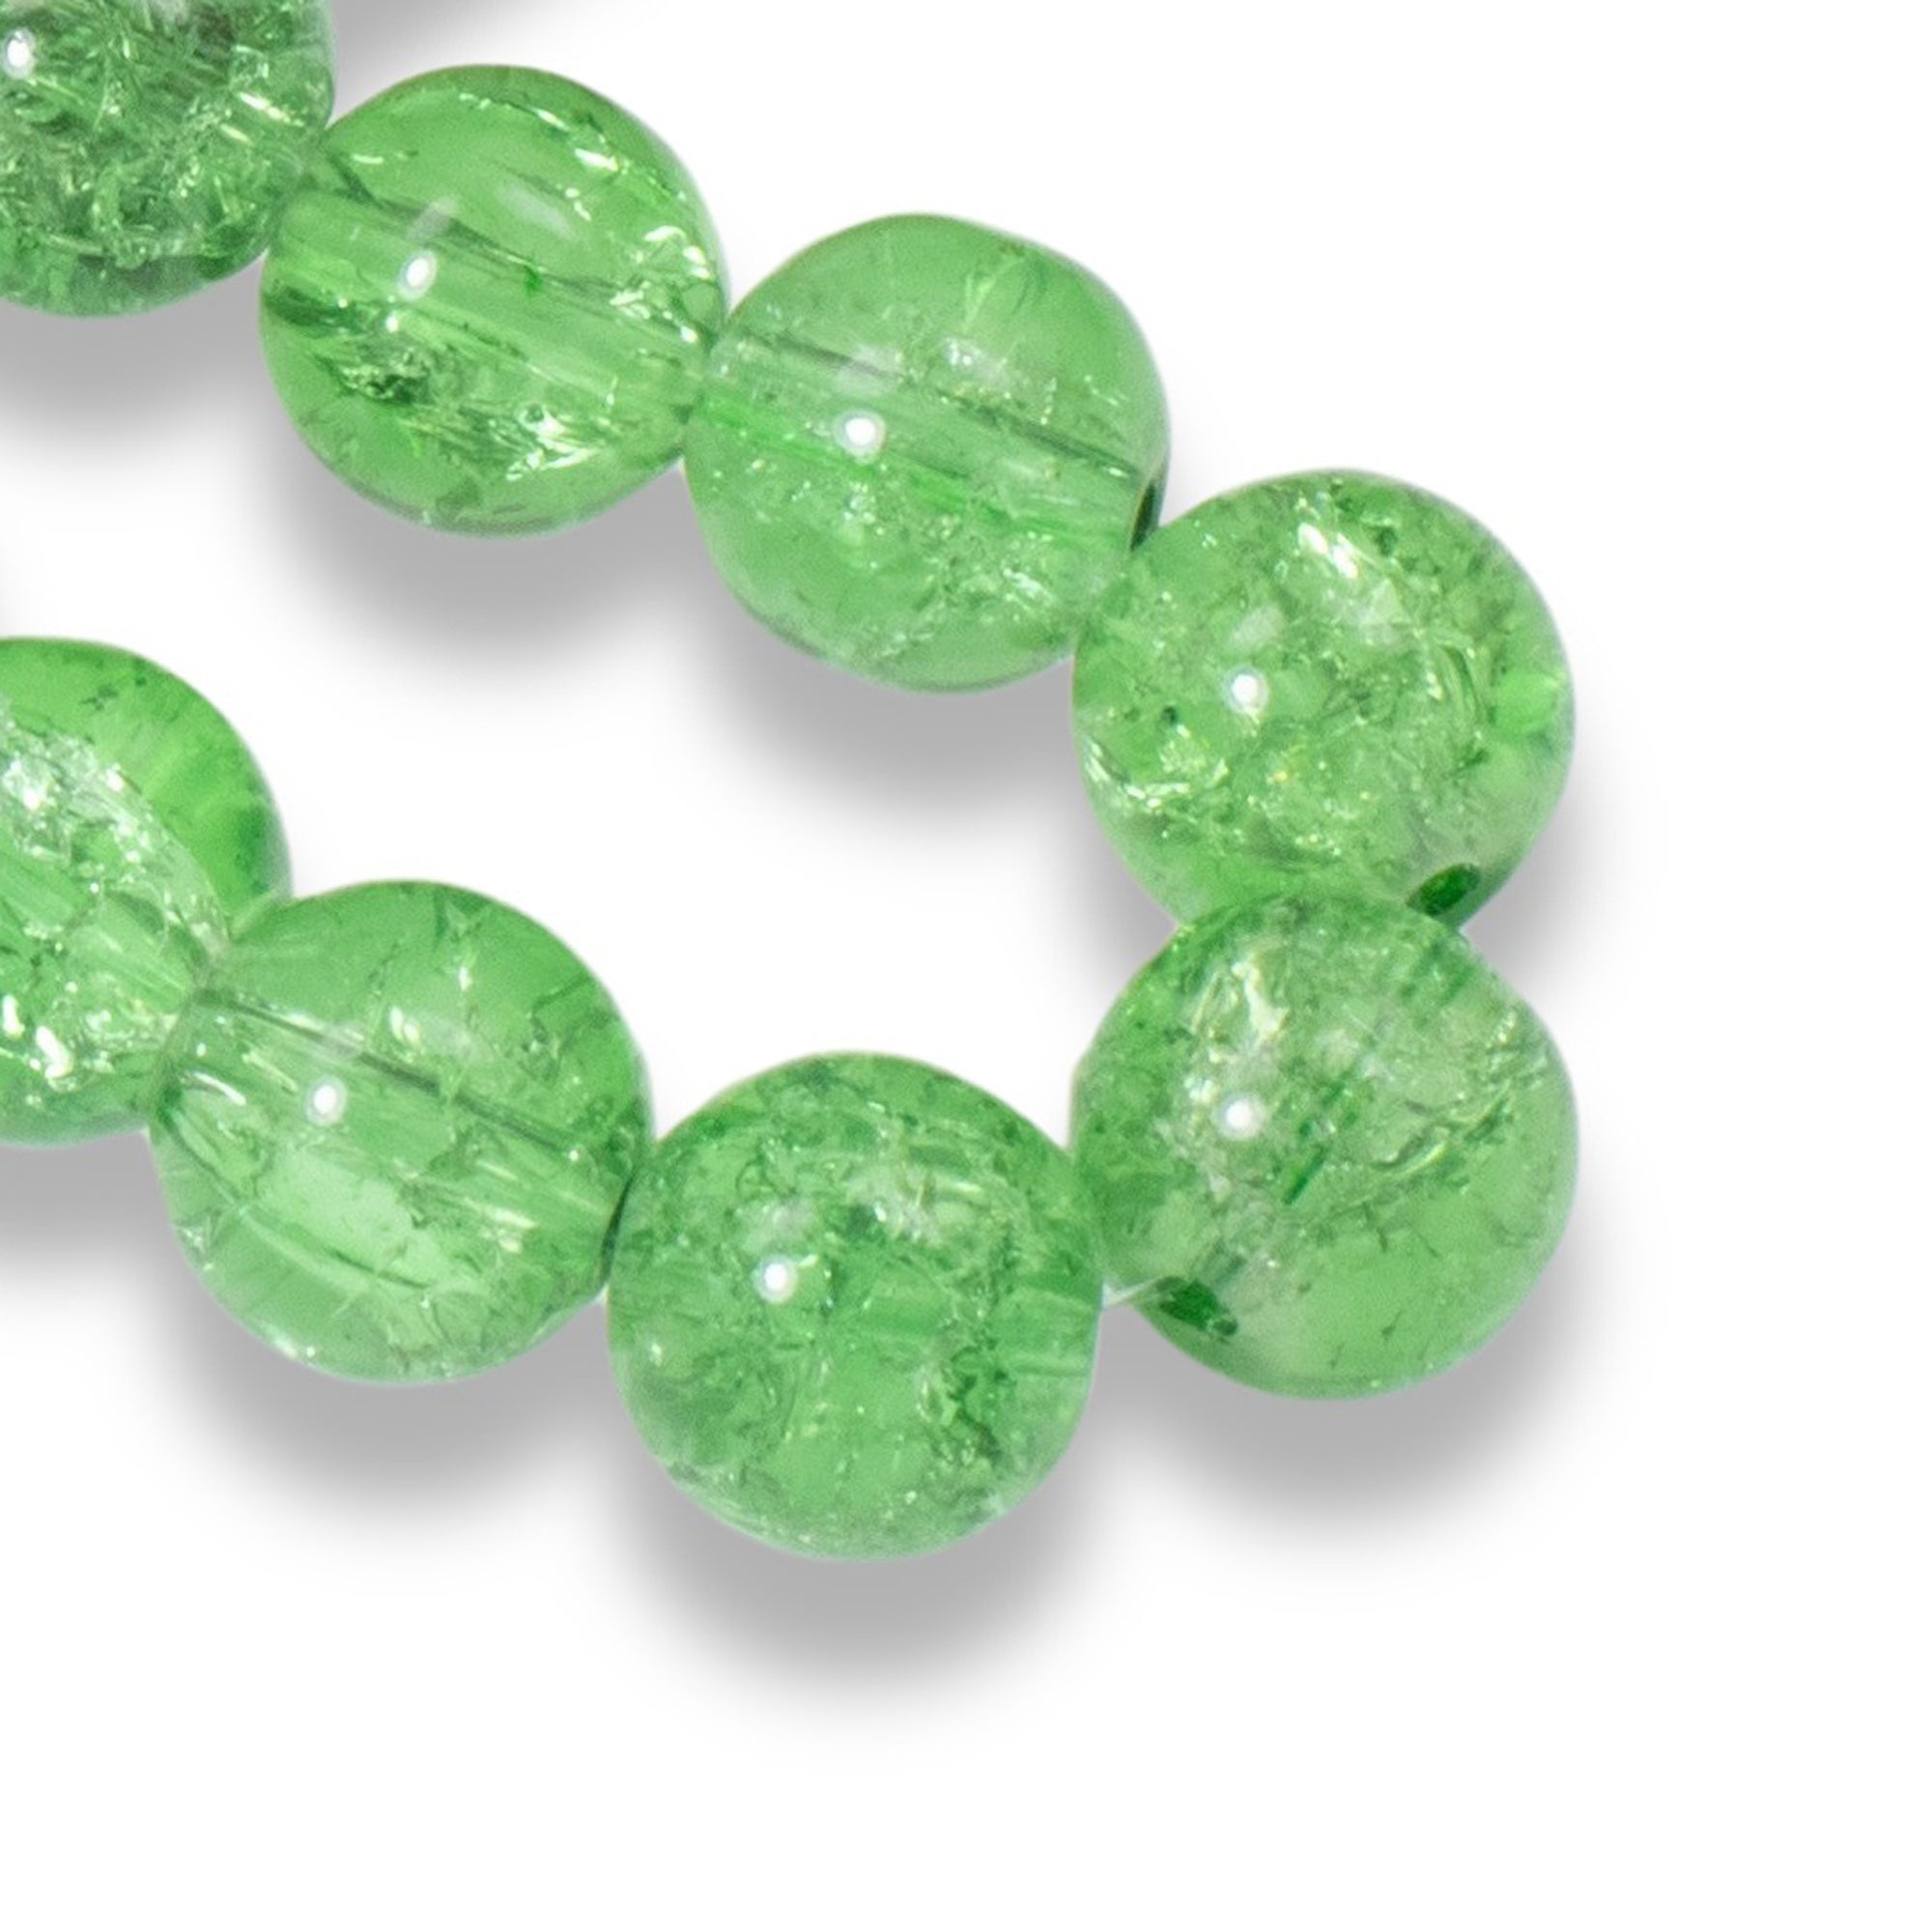 Ceramic Glass Beads 8mm Round Pistachio Green 45pcs at Rs 60.00